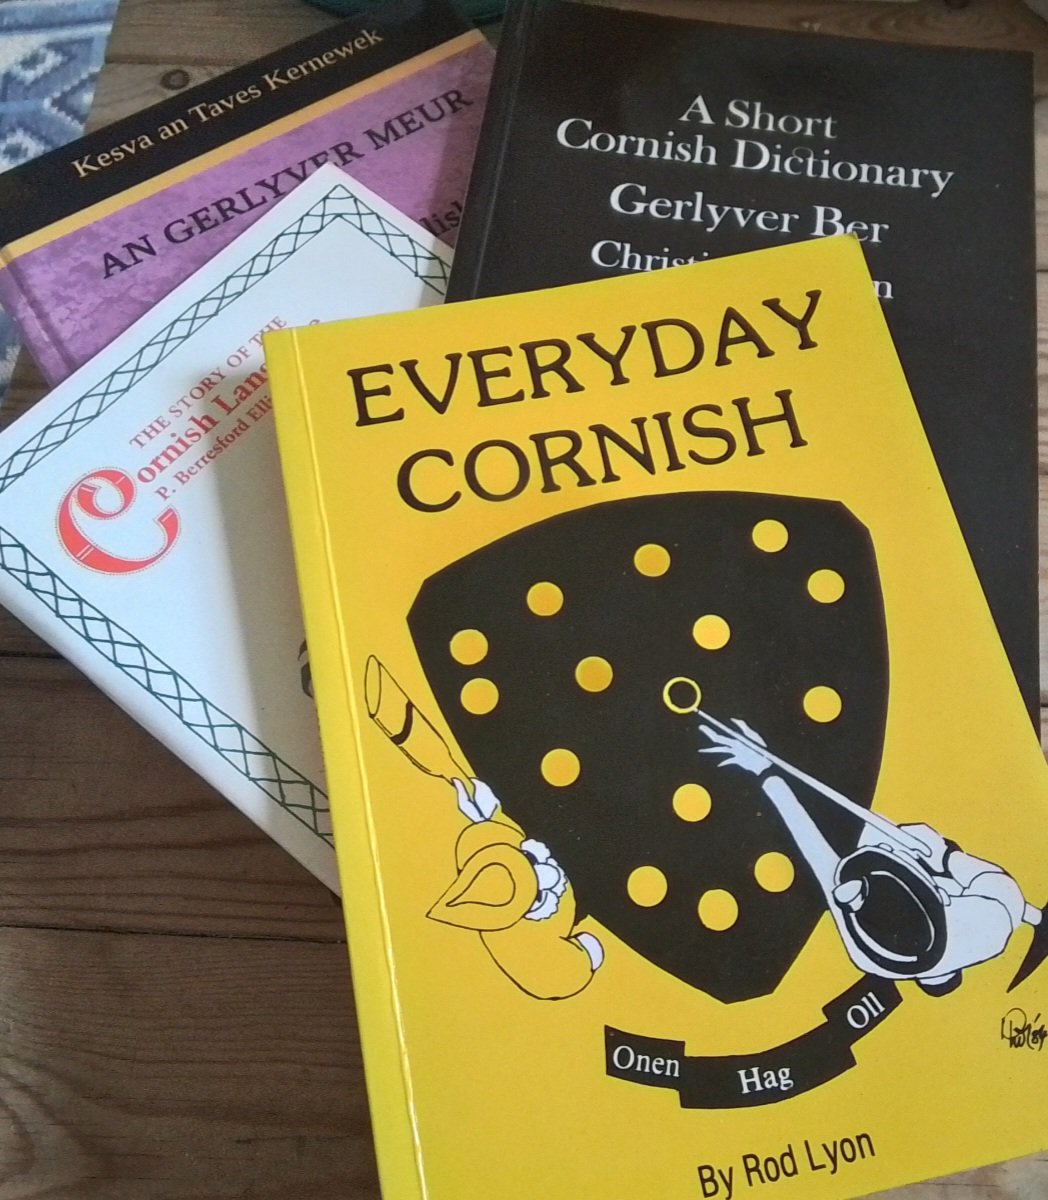 @an_sows I do have a Devon/Cornish ancestral family connection and my brother lived in St Ives during the mid-90s so I used to spend a lot of time there. I still have a few Cornish related books from back then which you used to find outside the shops on racks for a couple of quid.